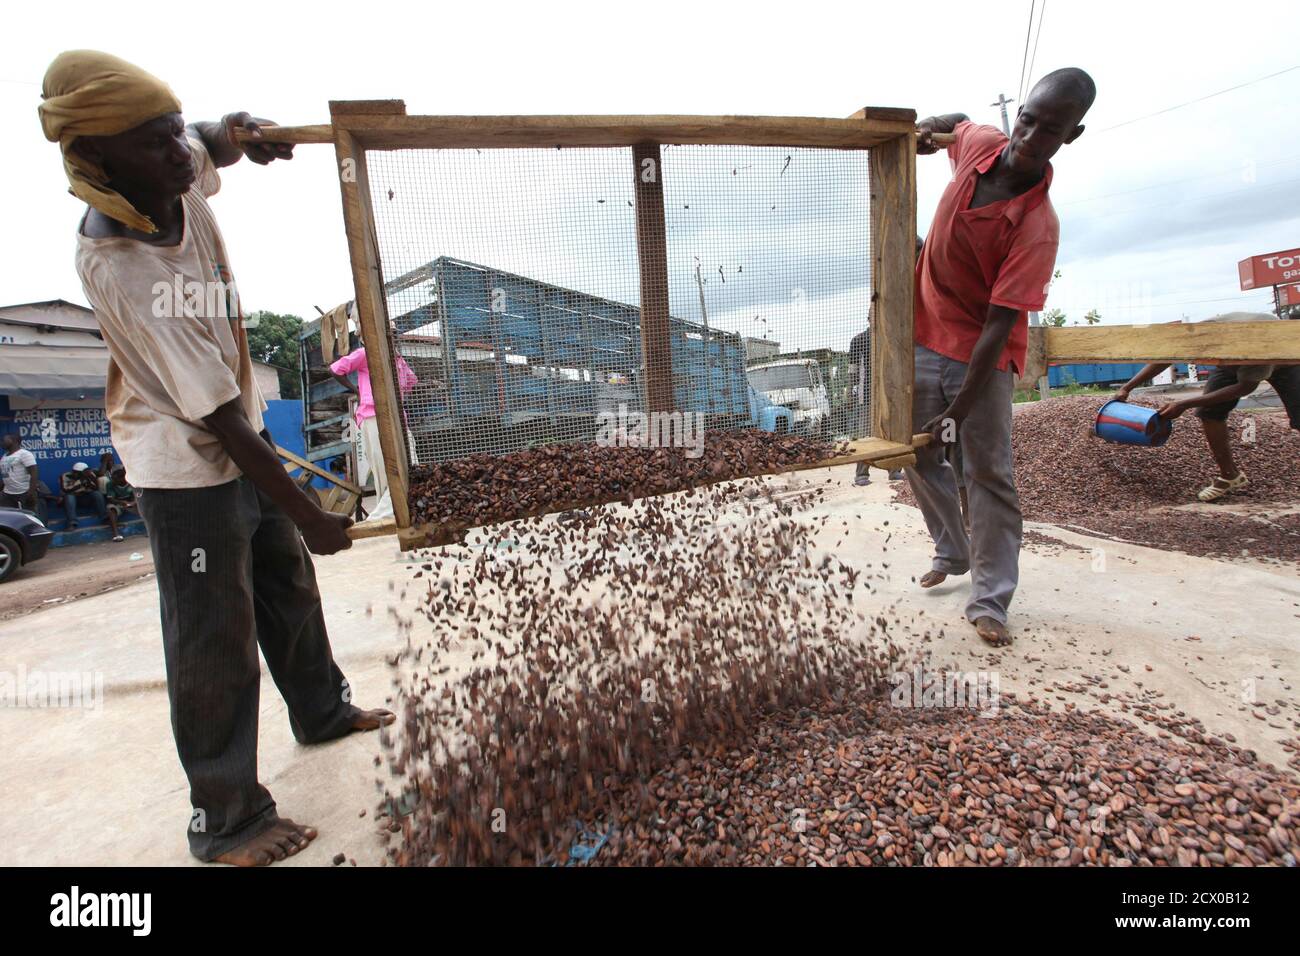 Worker sort cocoa beans in Duekoue May 18, 2011. Ivory Coast's cocoa industry, which feeds some 40 percent of global demand, was badly hit by the country's internal strife, which only eased when forces loyal to Alassane Ouattara, rival to former president Laurent Gbagbo, captured Gbagbo from his home last month, with the help of the French military. EU and U.S. sanctions on Gbagbo and his aides, plus a call for a cocoa ban by Ouattara, effectively shut down exports for three months. The banking system collapsed, leaving cocoa traders with no cash to pay farmers. To match feature IVORYCOAST-FAR Stock Photo